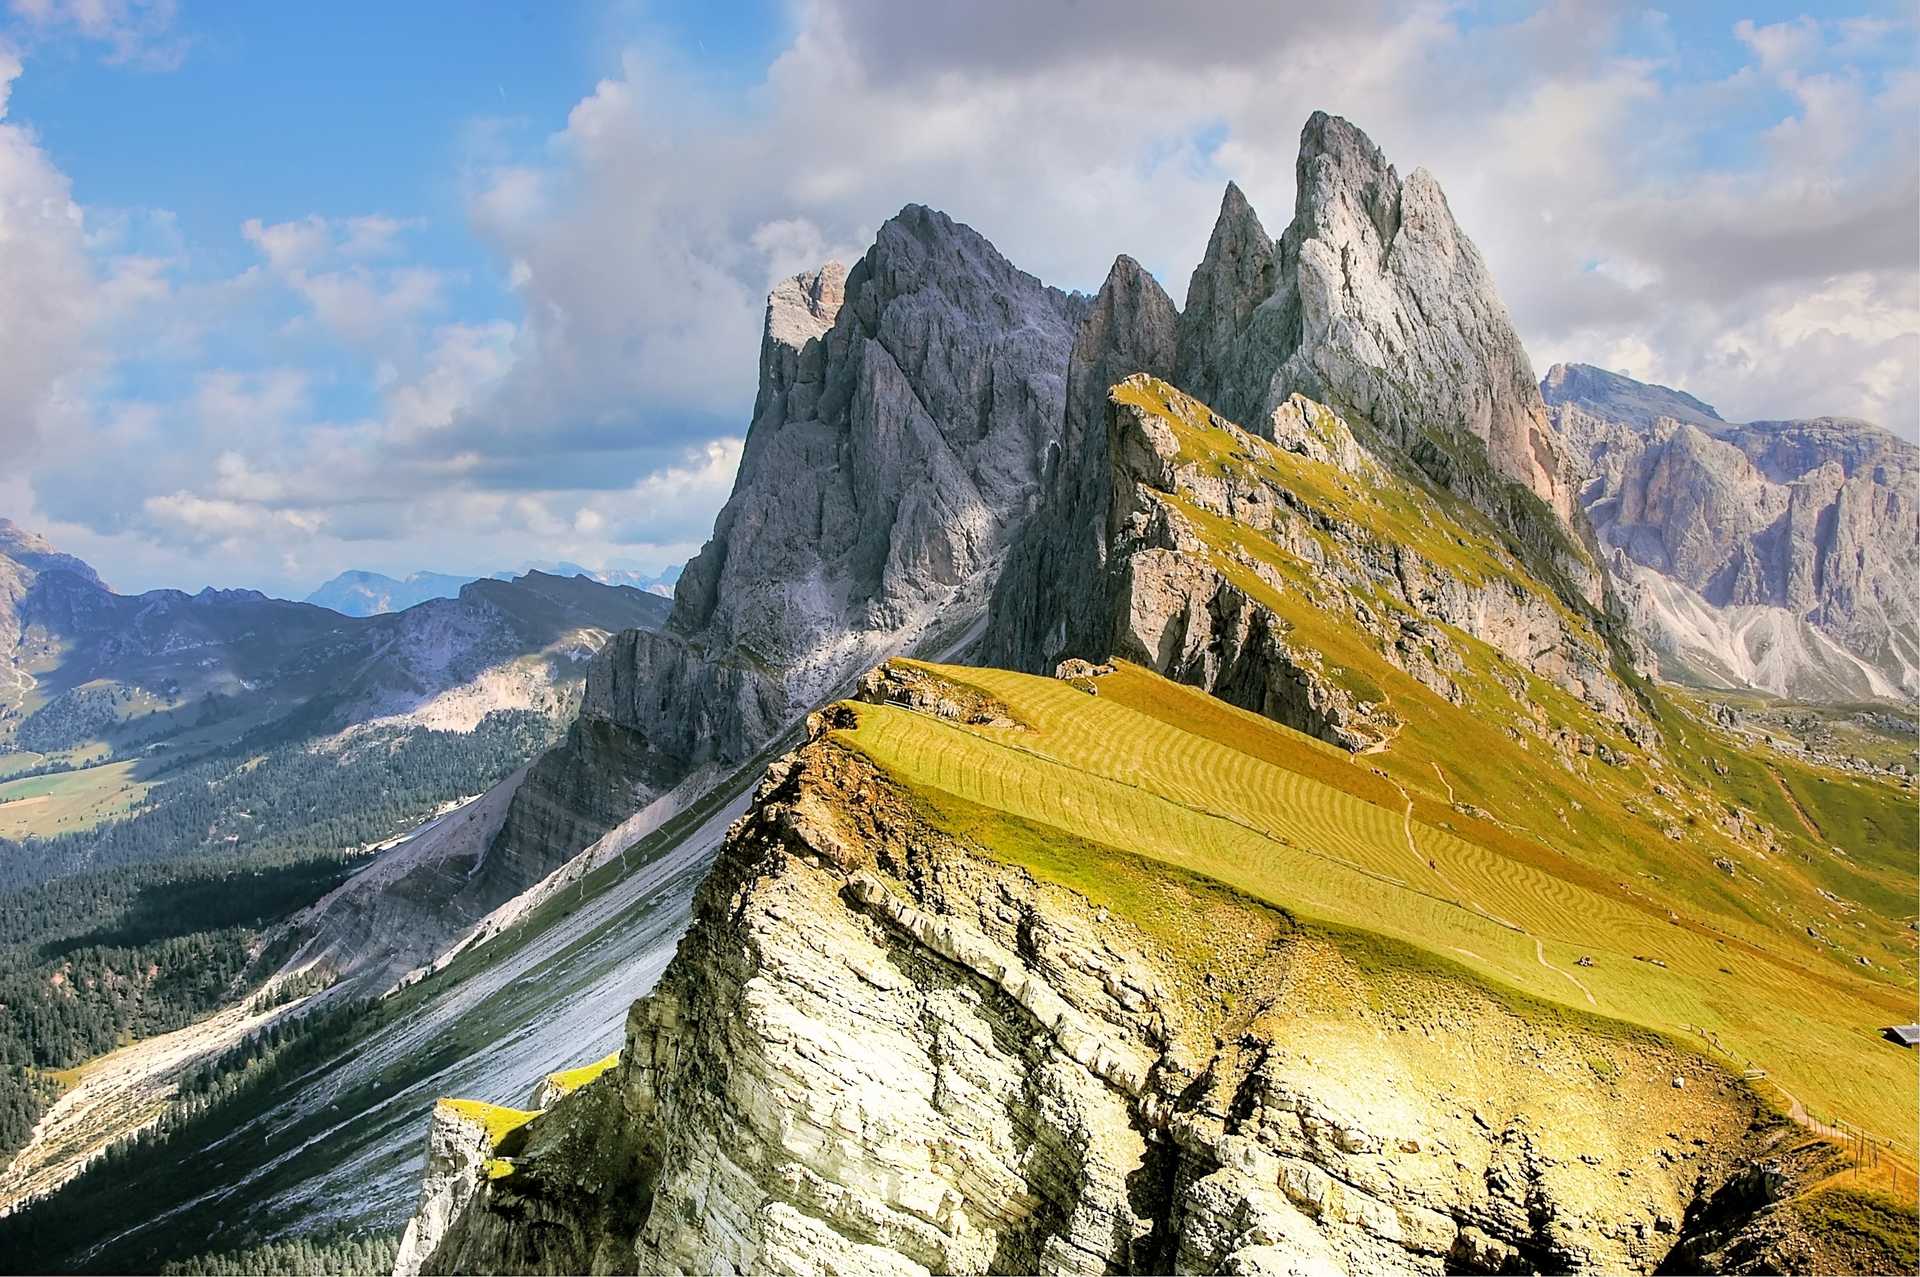 Researchers Resolved the Dolomite Problem